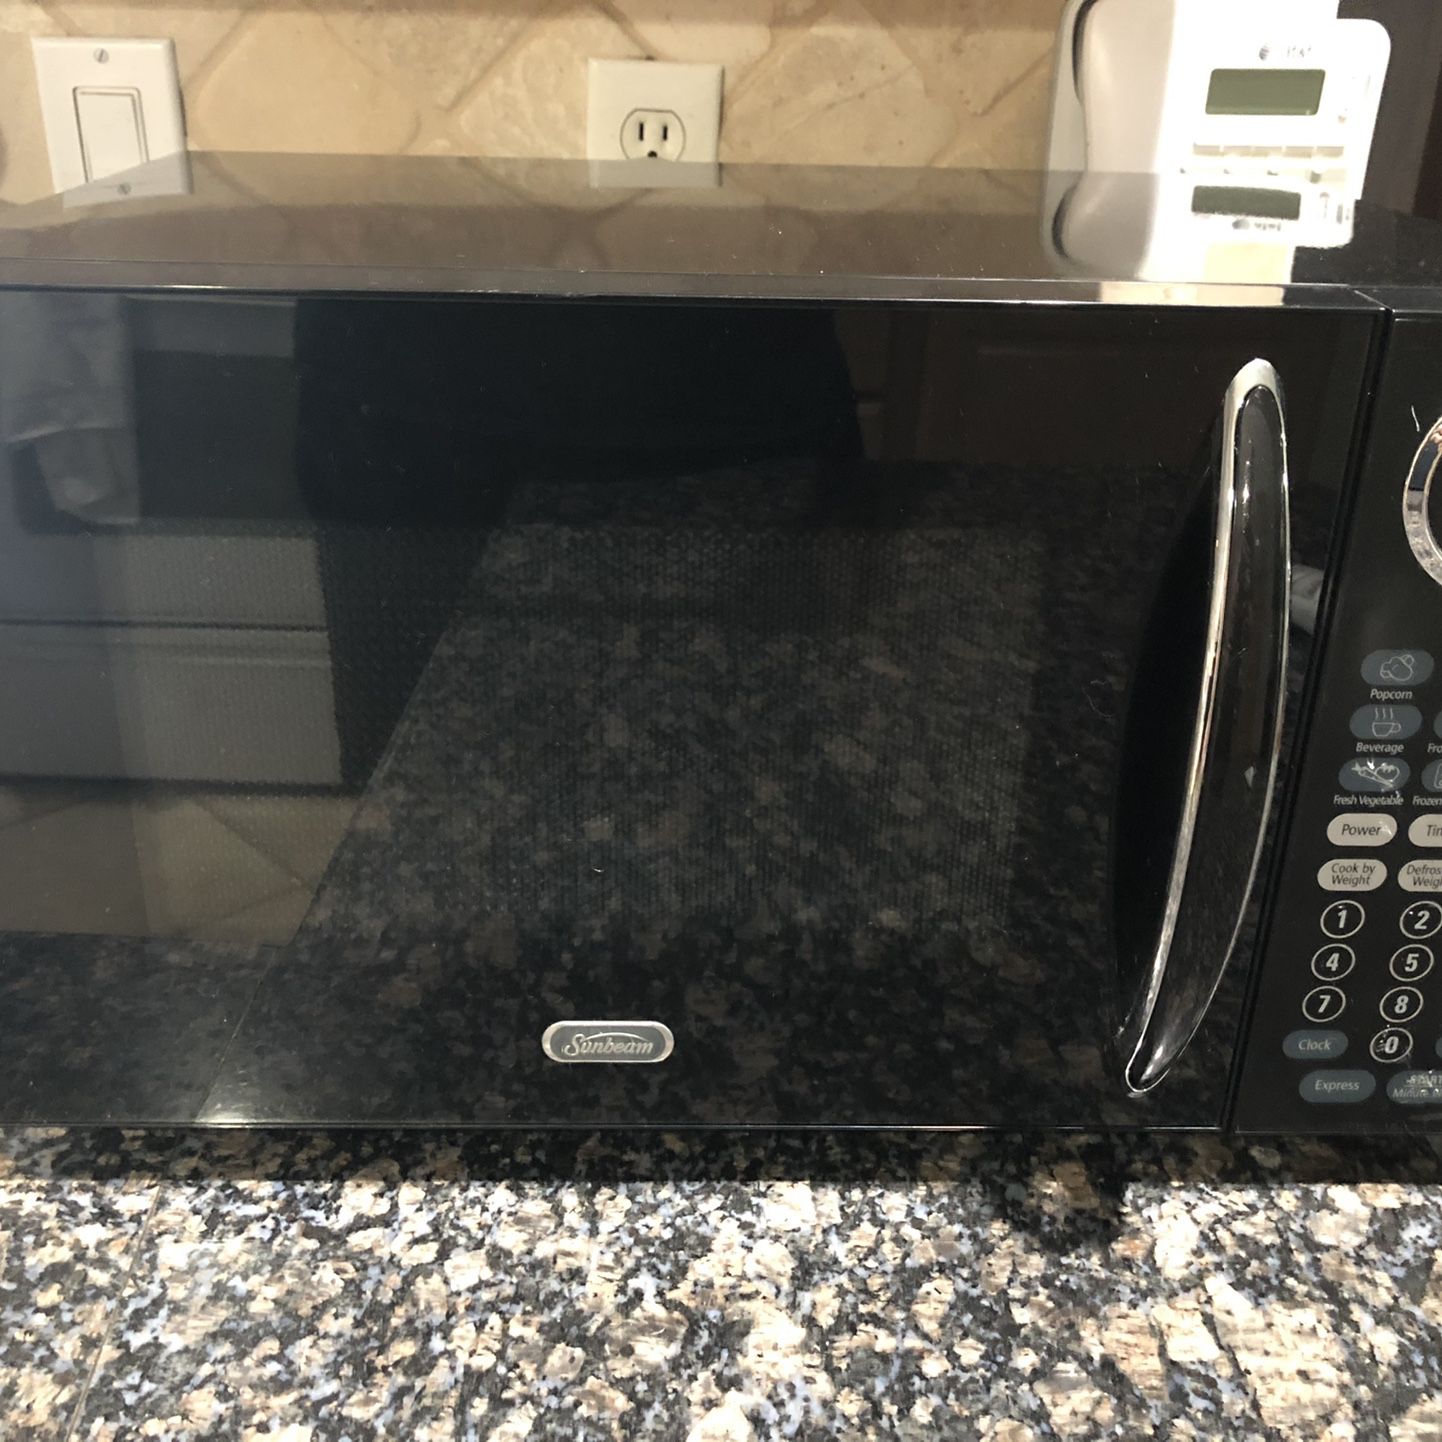 Sunbeam 900 Watt Microwave , Prefect For College . Clean Works Great Used For One Year In College. 19x12